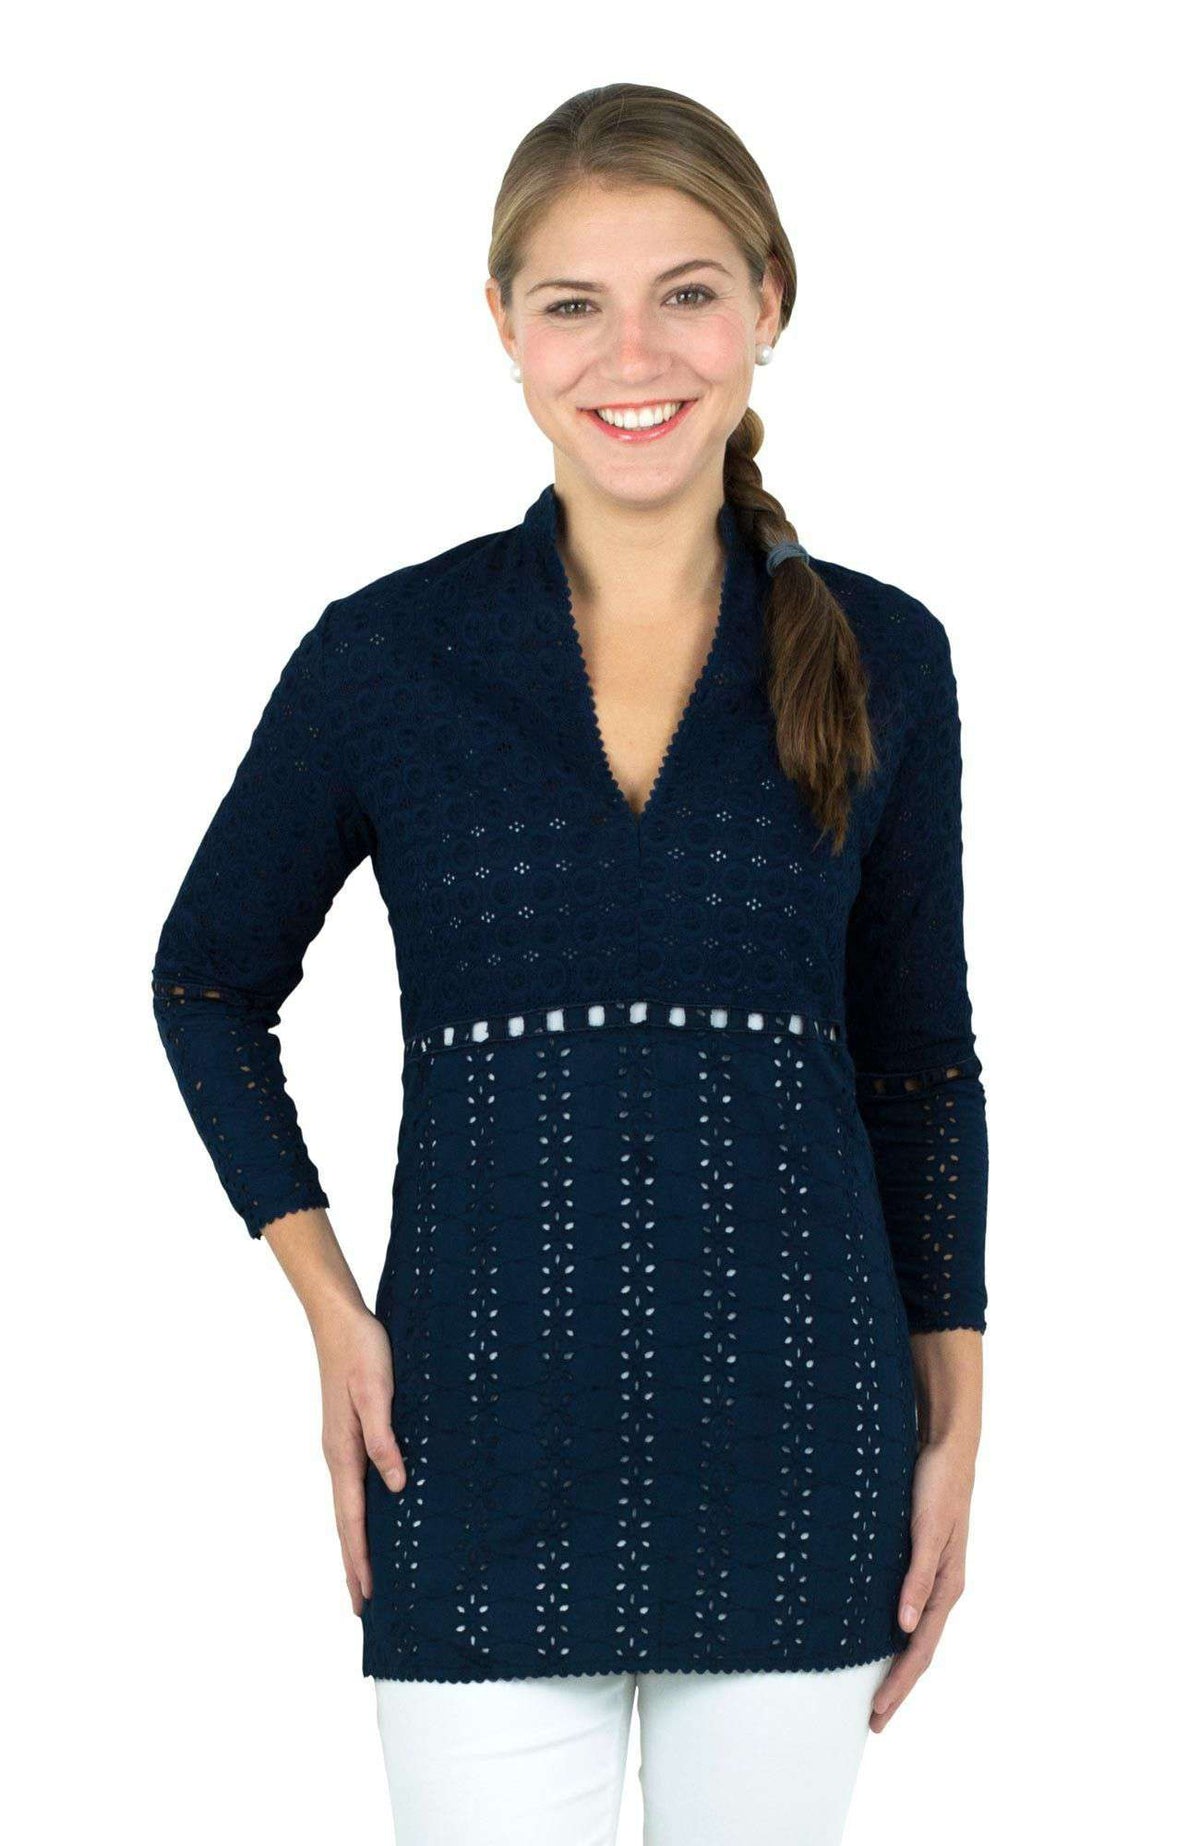 Mixed Eyelet Tunic in Navy by Gretchen Scott Designs - Country Club Prep